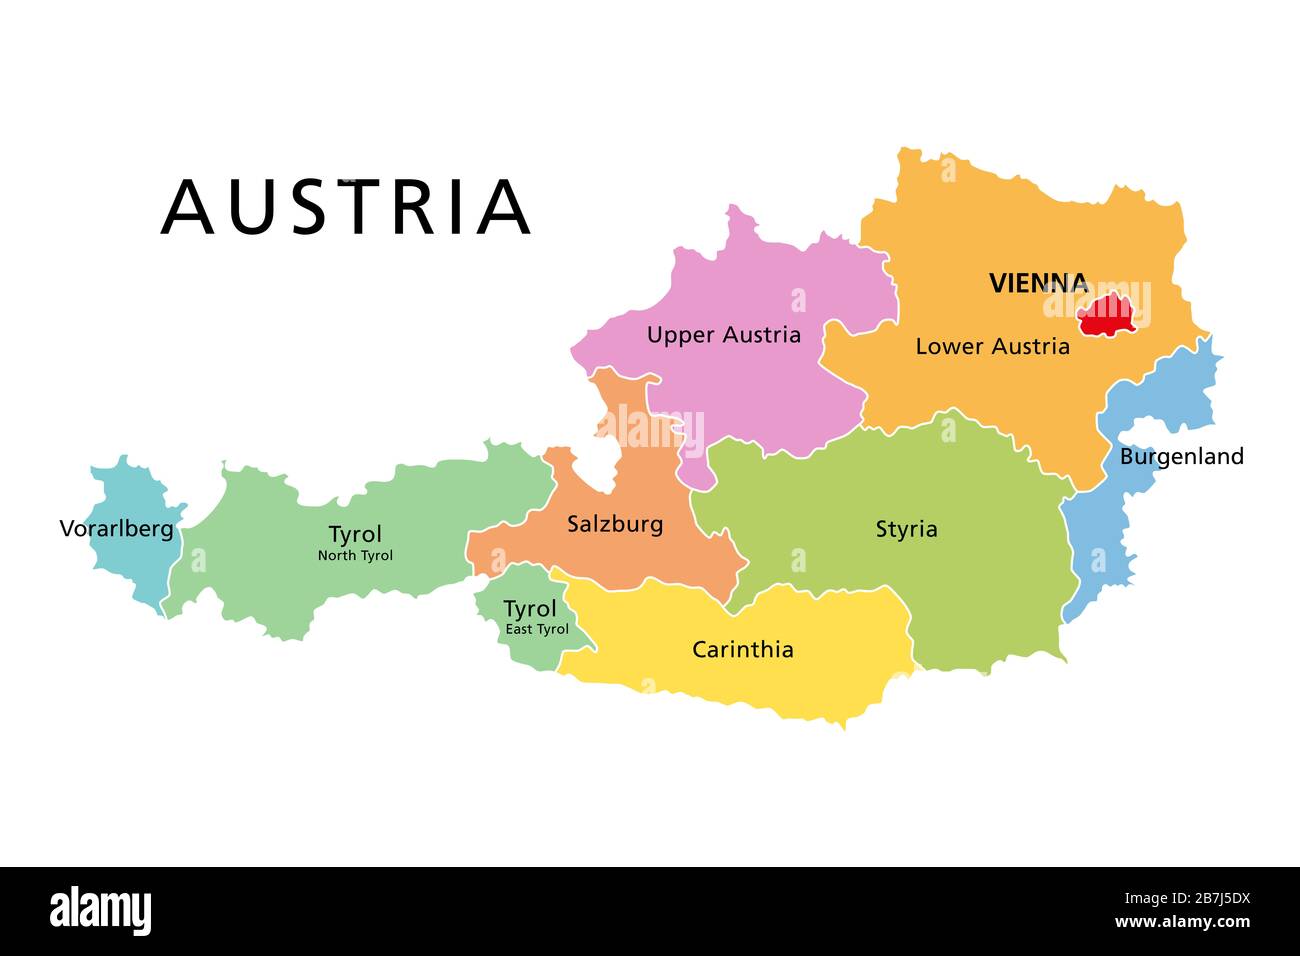 Austria, political map, with colored federated states, the capital Vienna and the borders. English labeling. Isolated illustration on white background Stock Photo